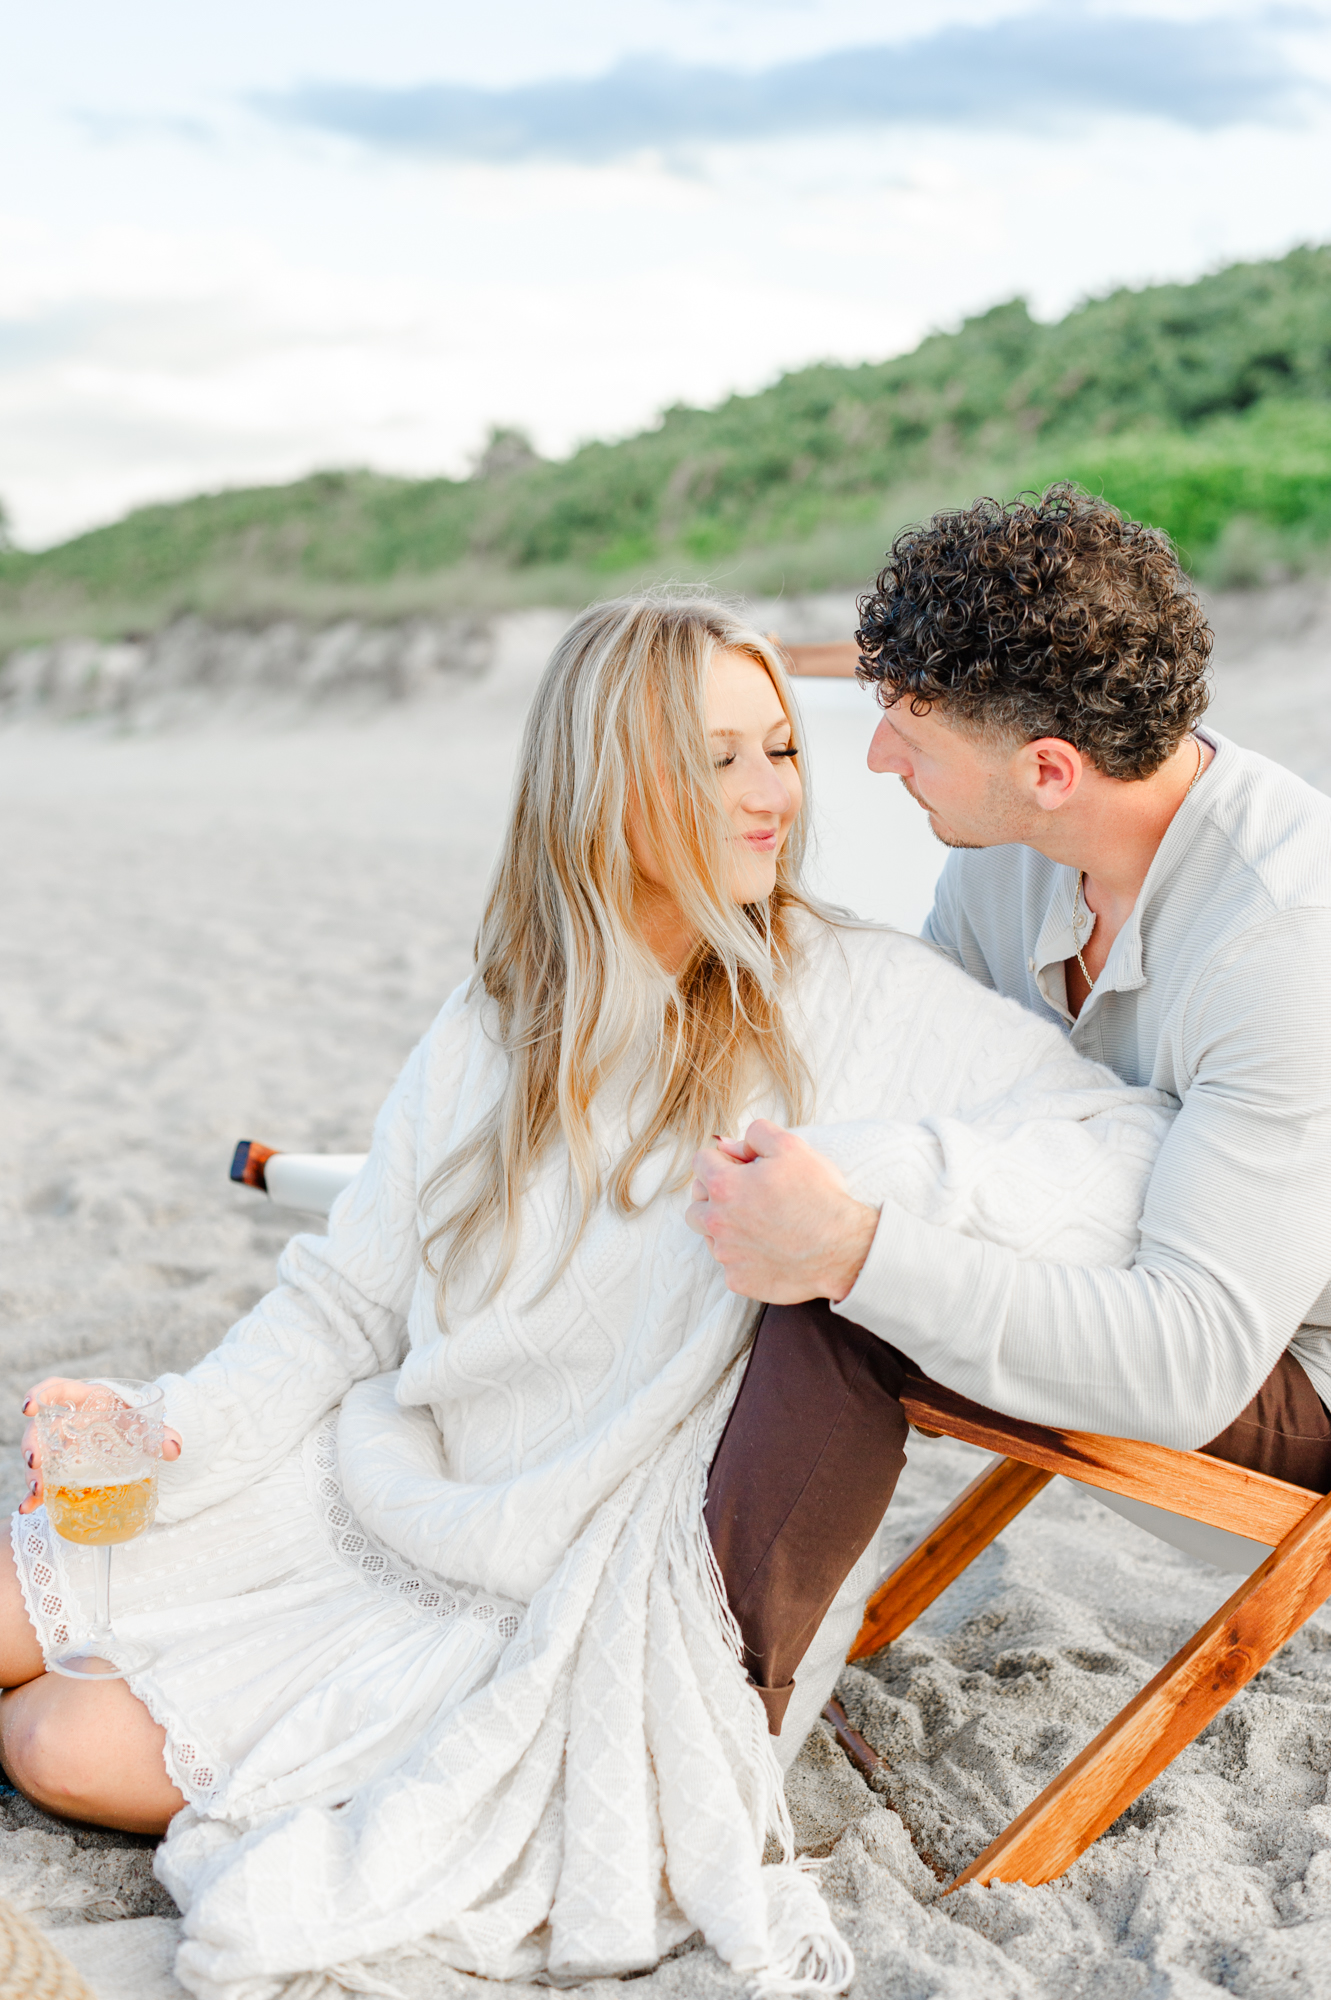 Couple flirts while cozied up on the beach for their luxury picnic date night.